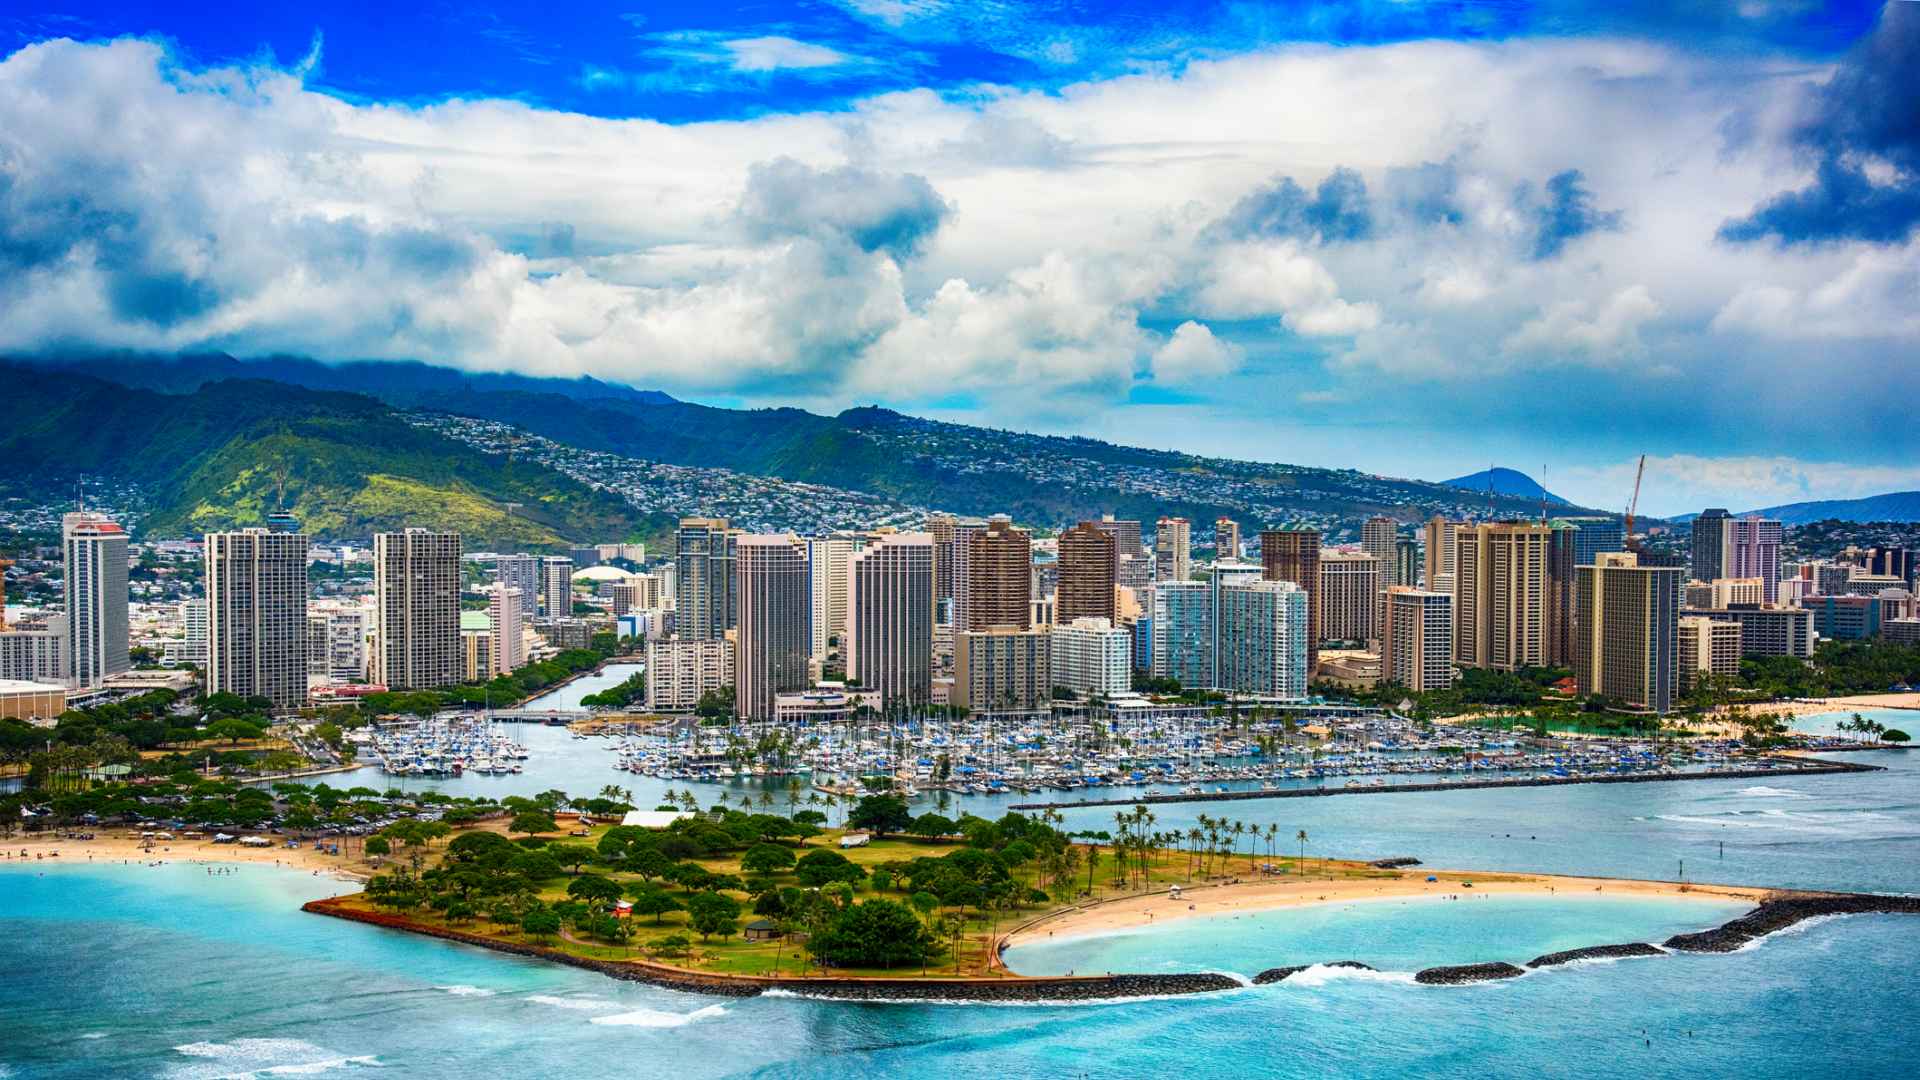 Hawaii vacation: How much does a cruise cost compared to a resort